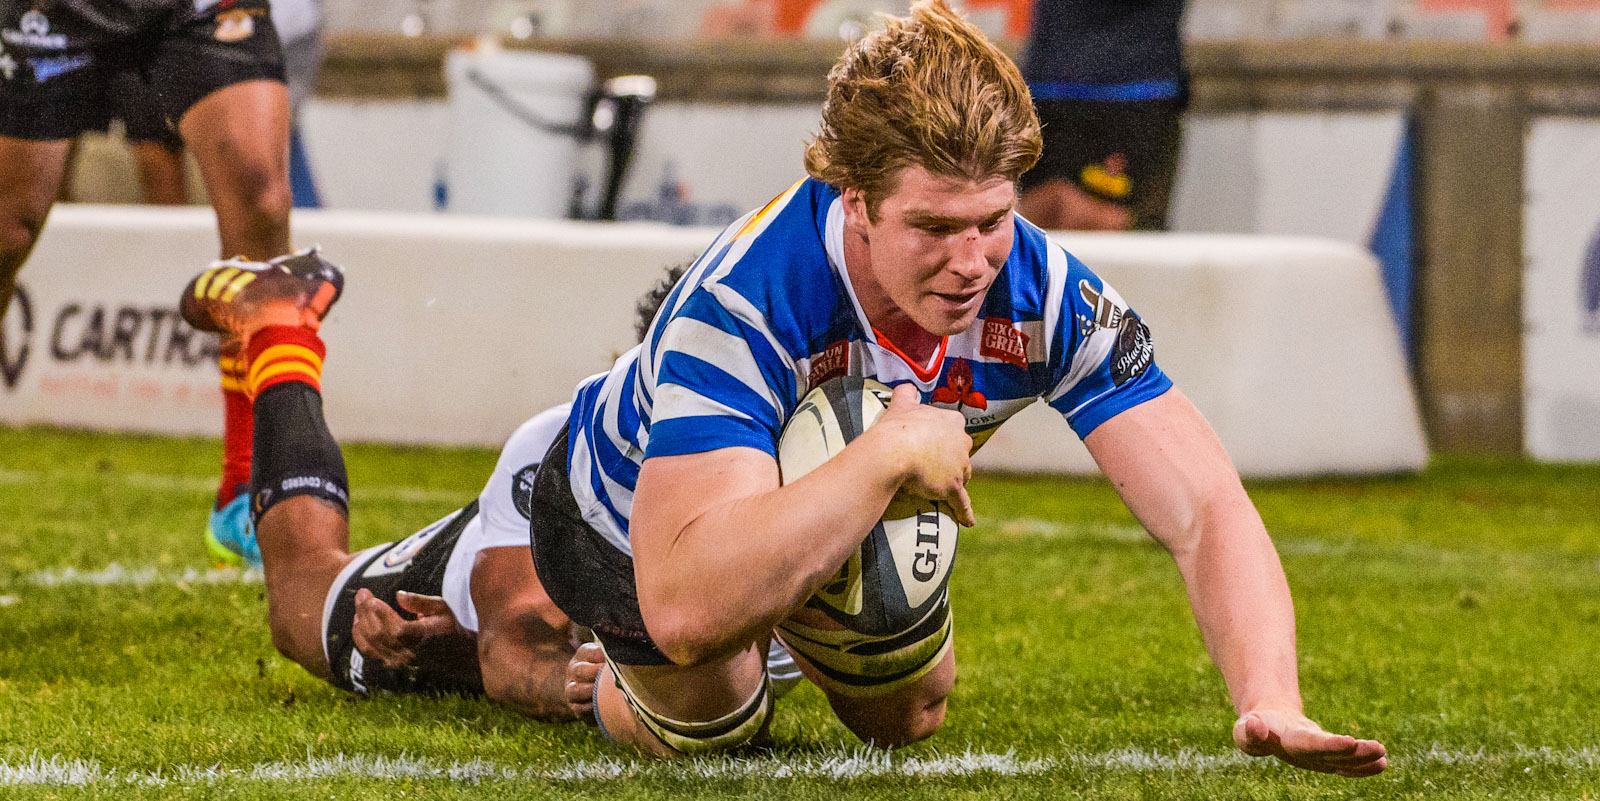 Evan Roos scored two tries for DHL WP.